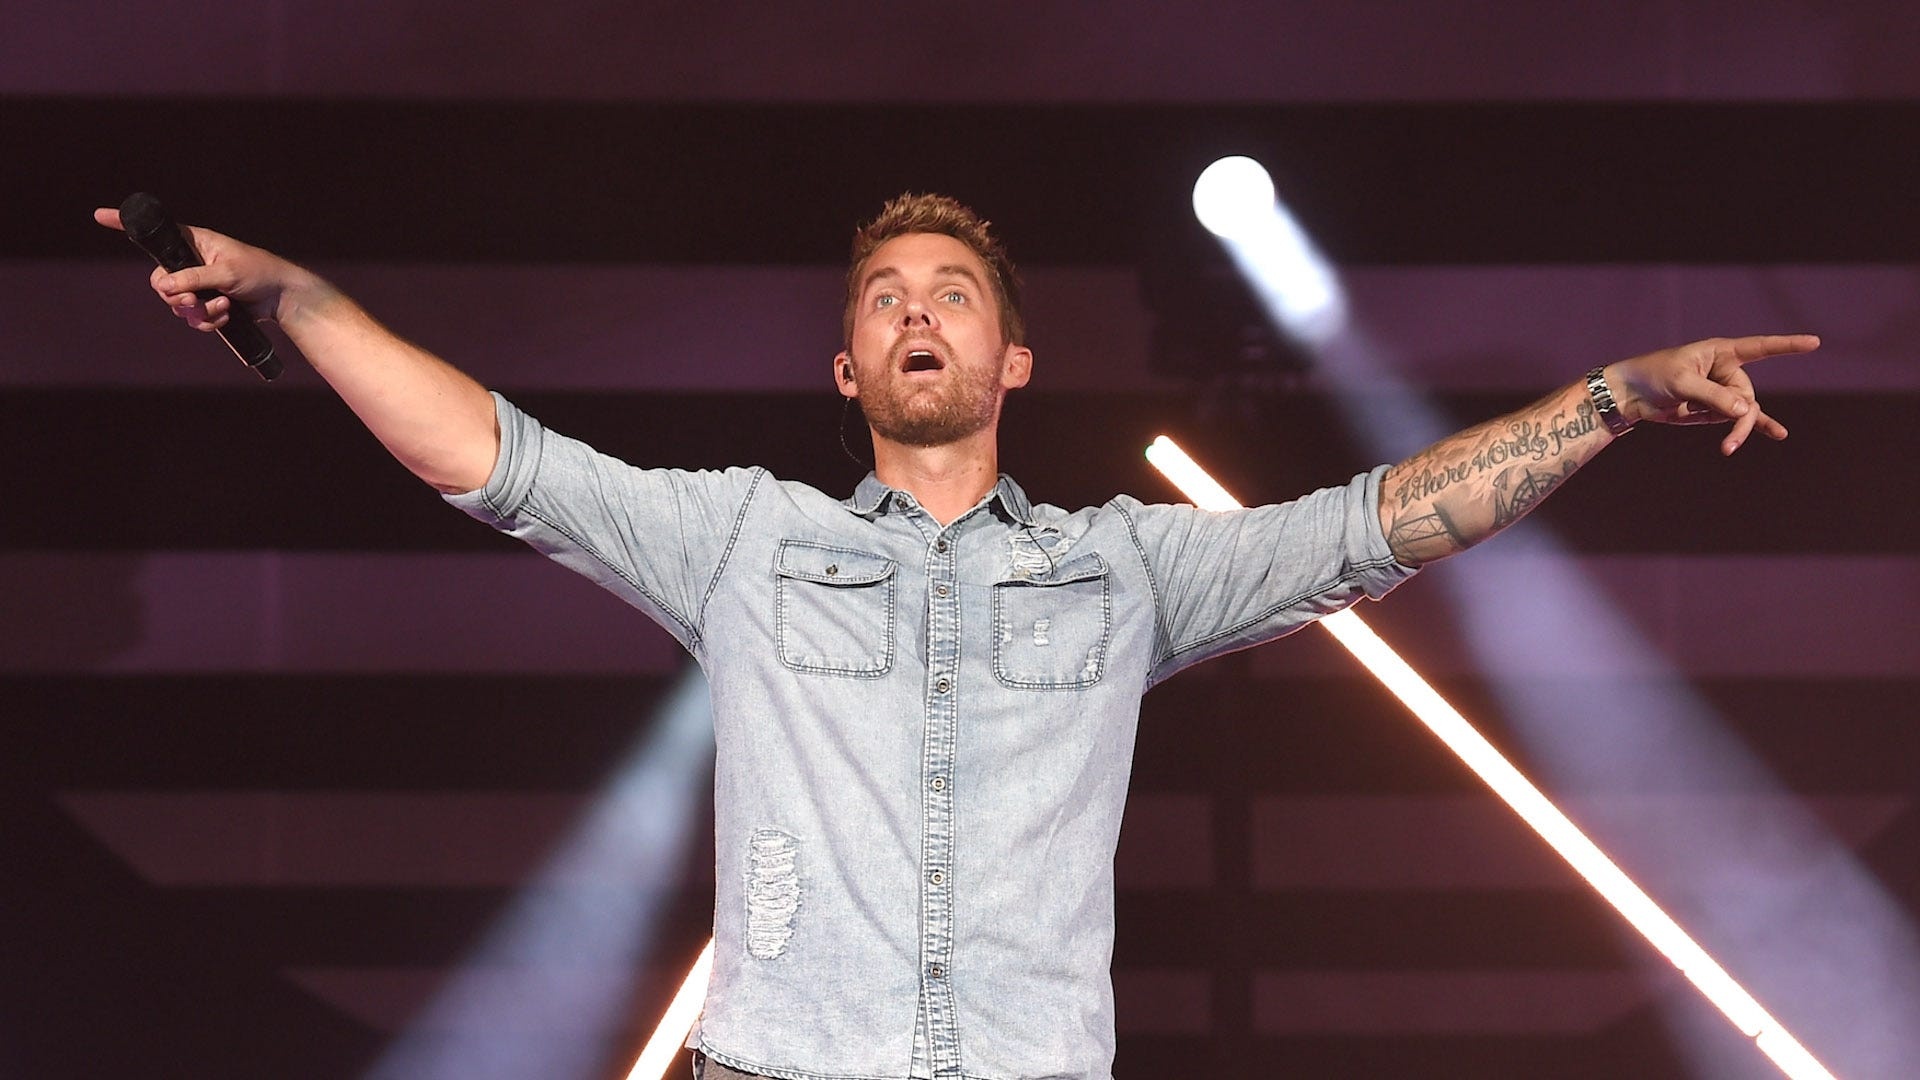 Brett Young, Private concert giveaway, Nashville experience, Exclusive opportunity, 1920x1080 Full HD Desktop